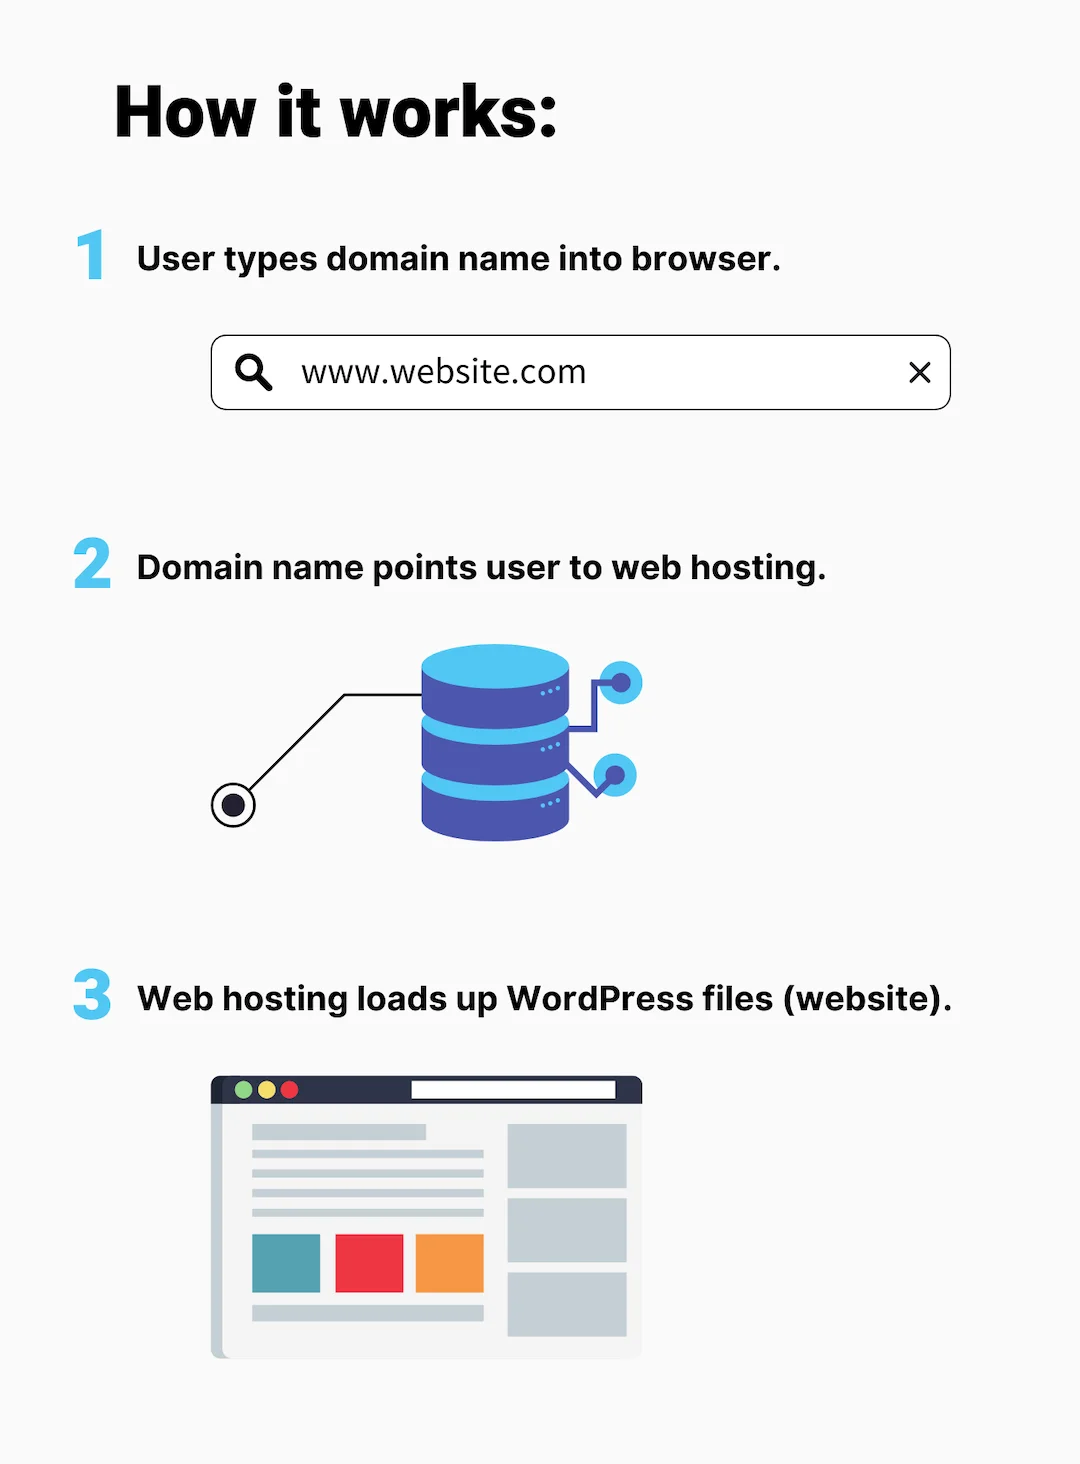 How it works: 1. User types domain name into browser. 2. Domain name points user to web hosting. 3. Web hosting loads up WordPress files (website).